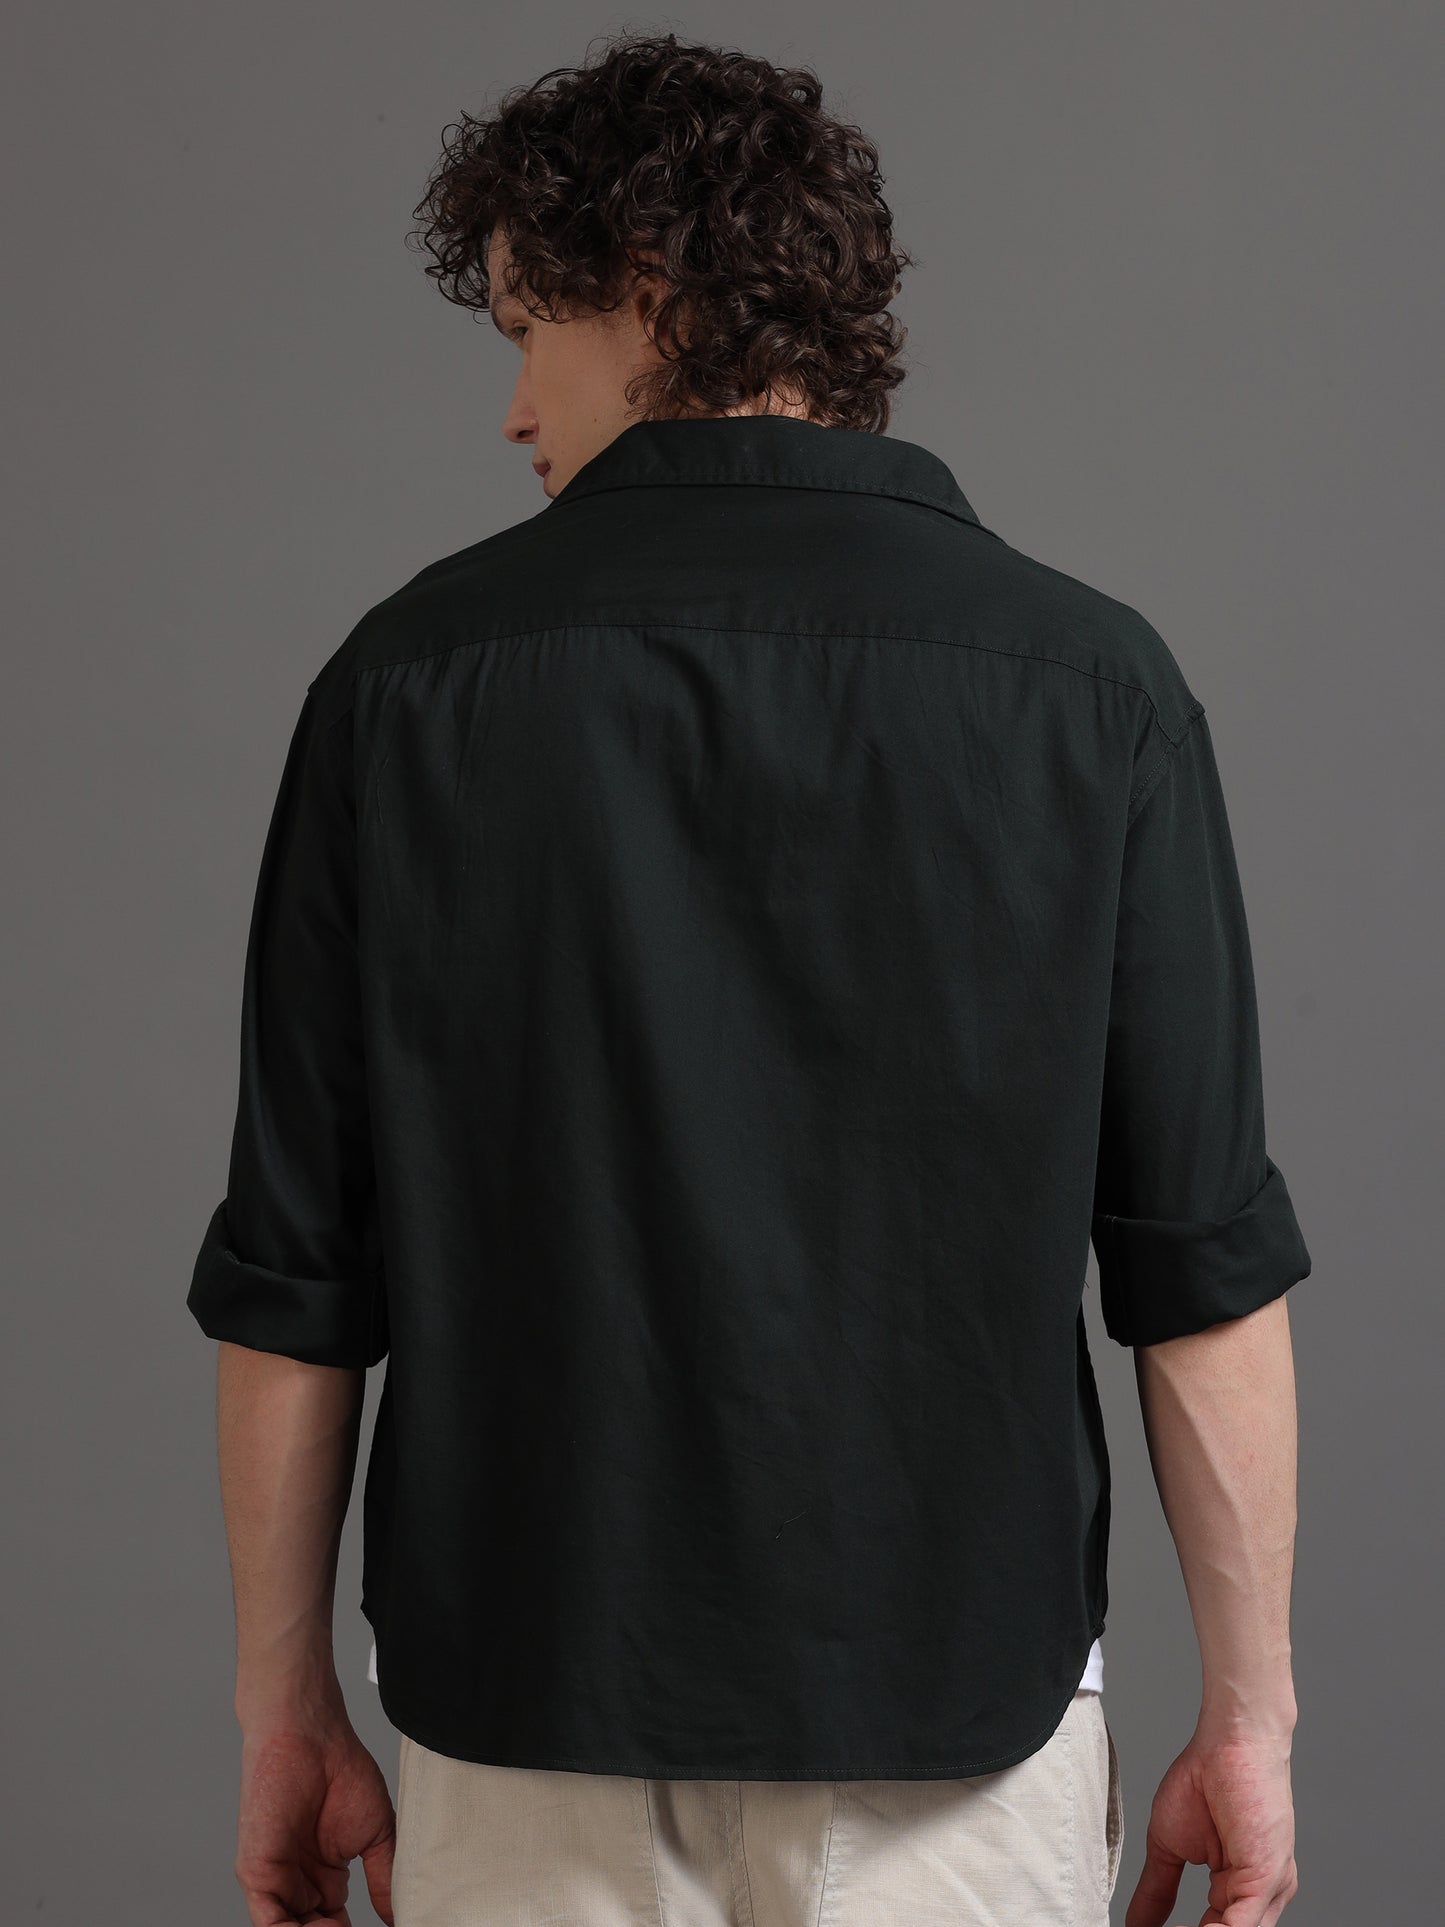 Premium Men Shirt, Relaxed Fit, Pure Cotton, Full Sleeve, Solid, Dark Olive